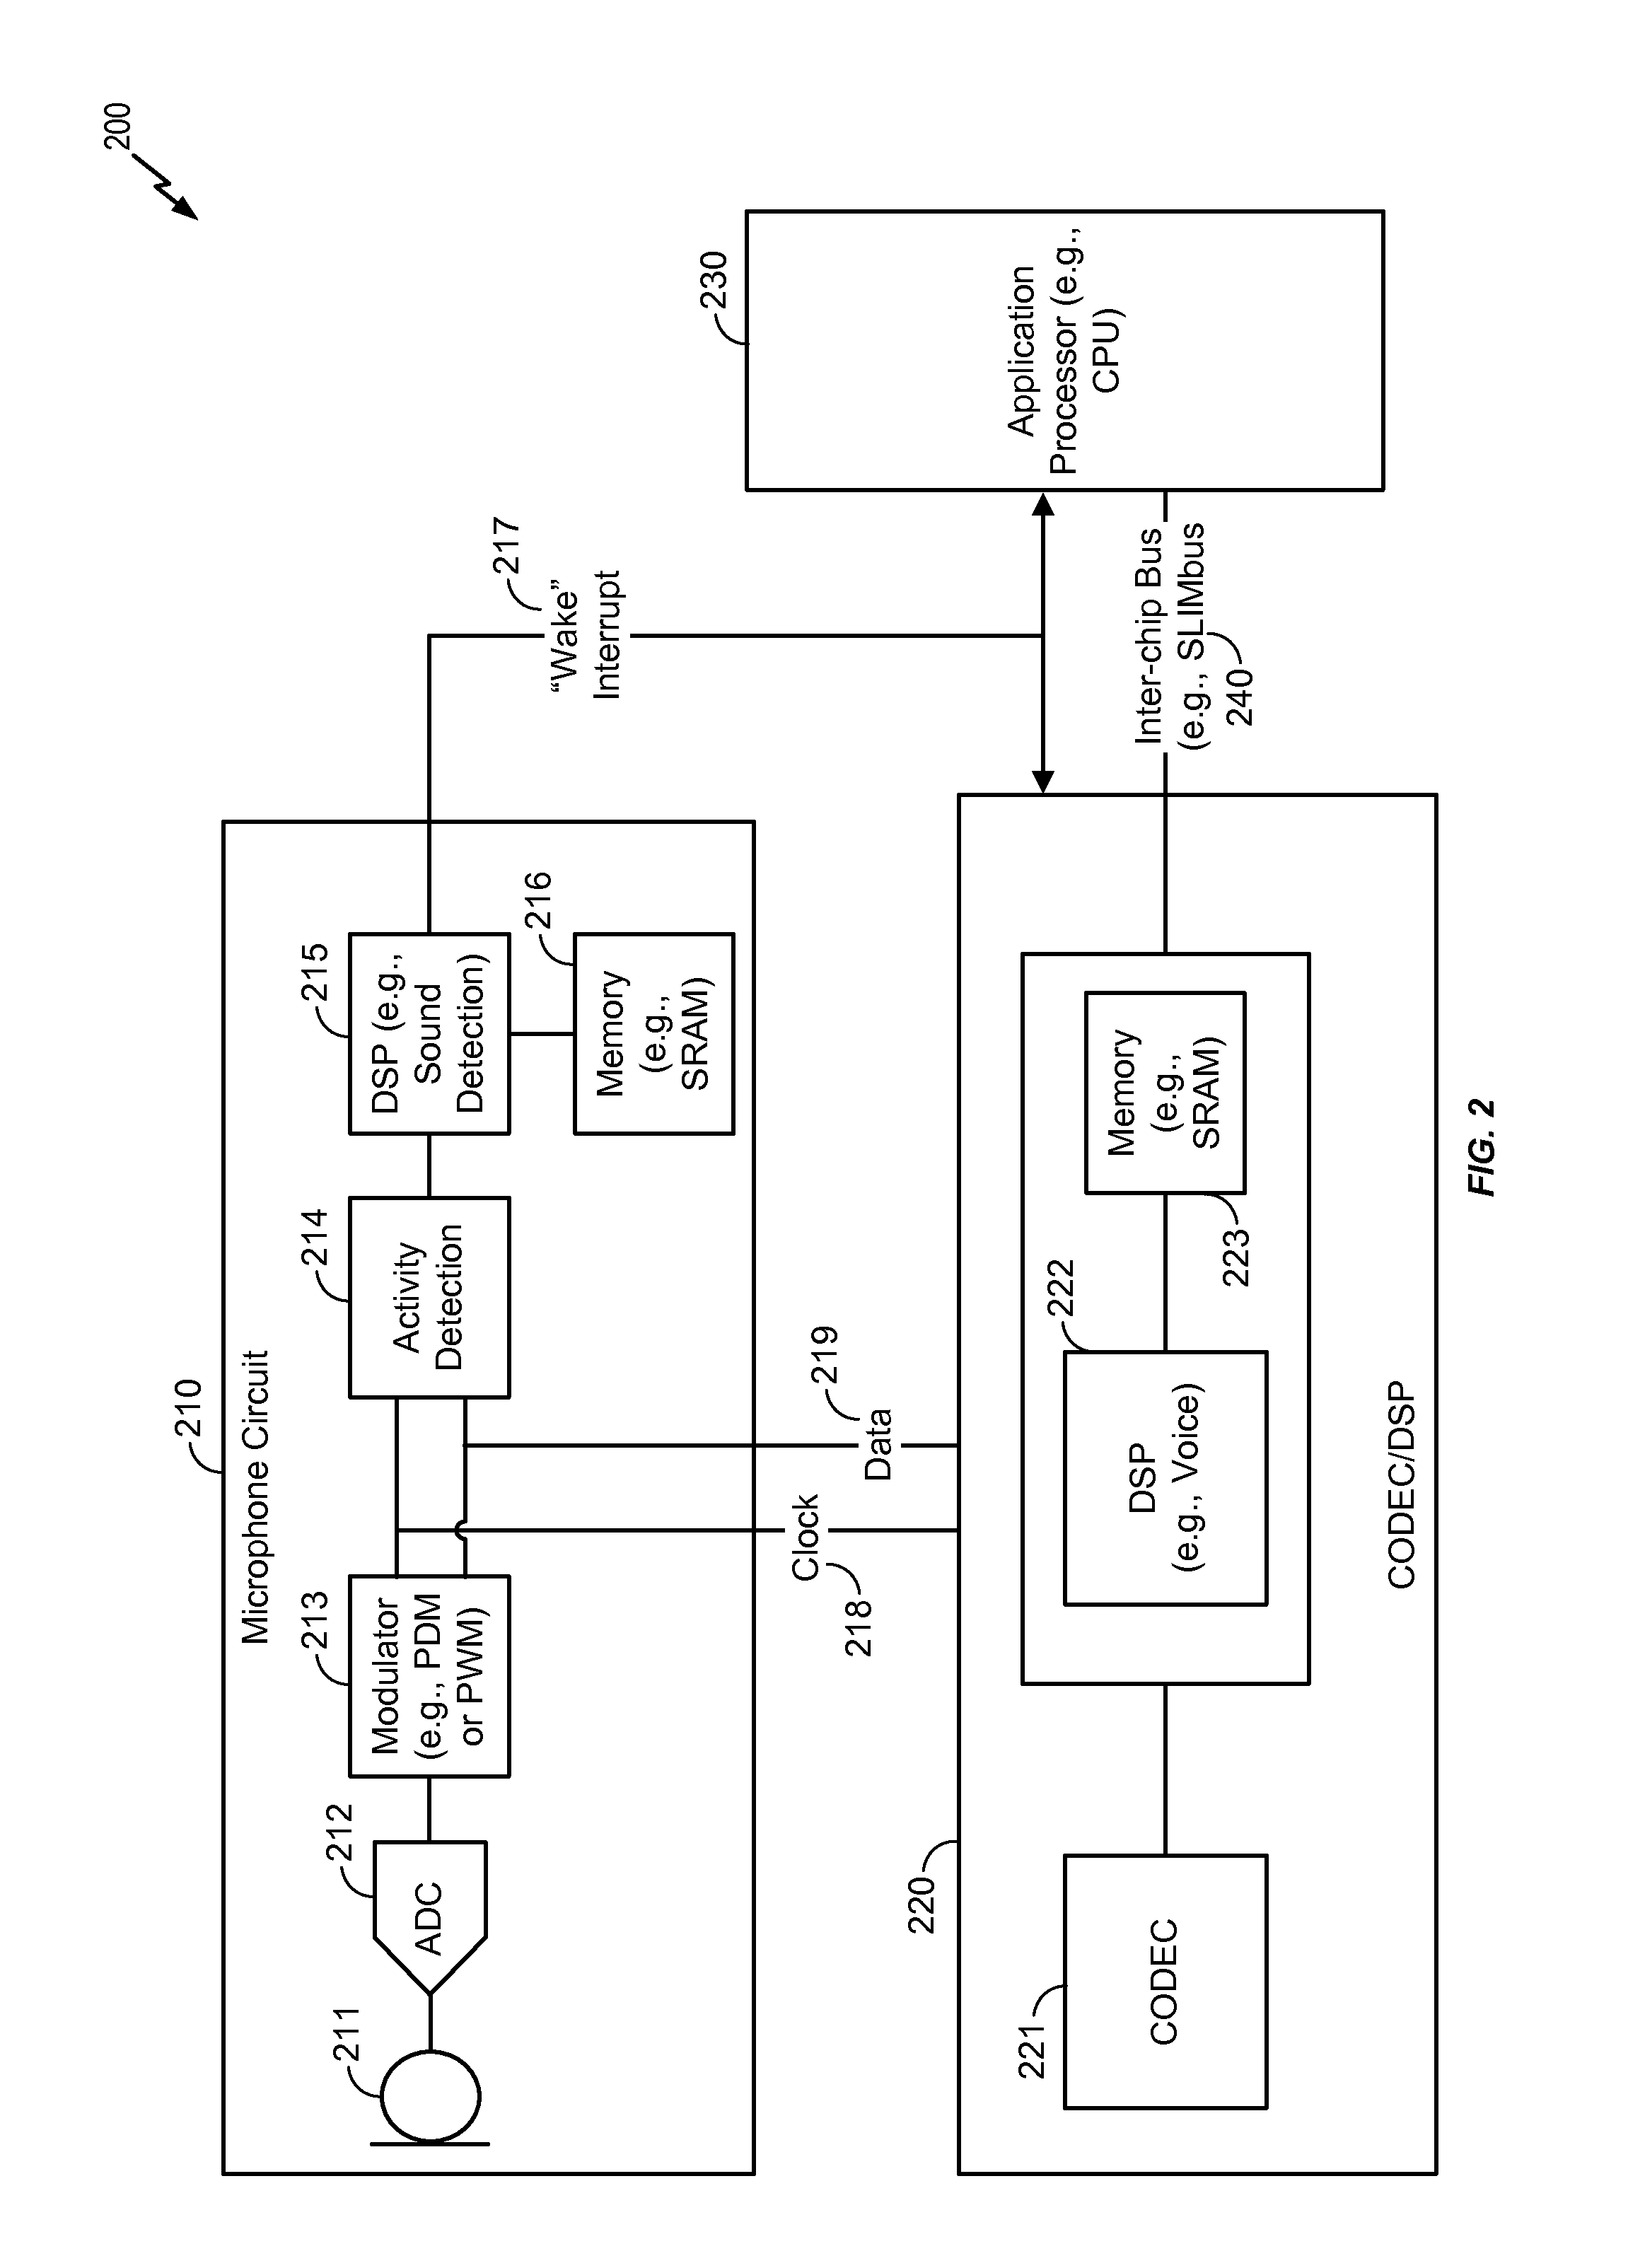 Selective enabling of a component by a microphone circuit